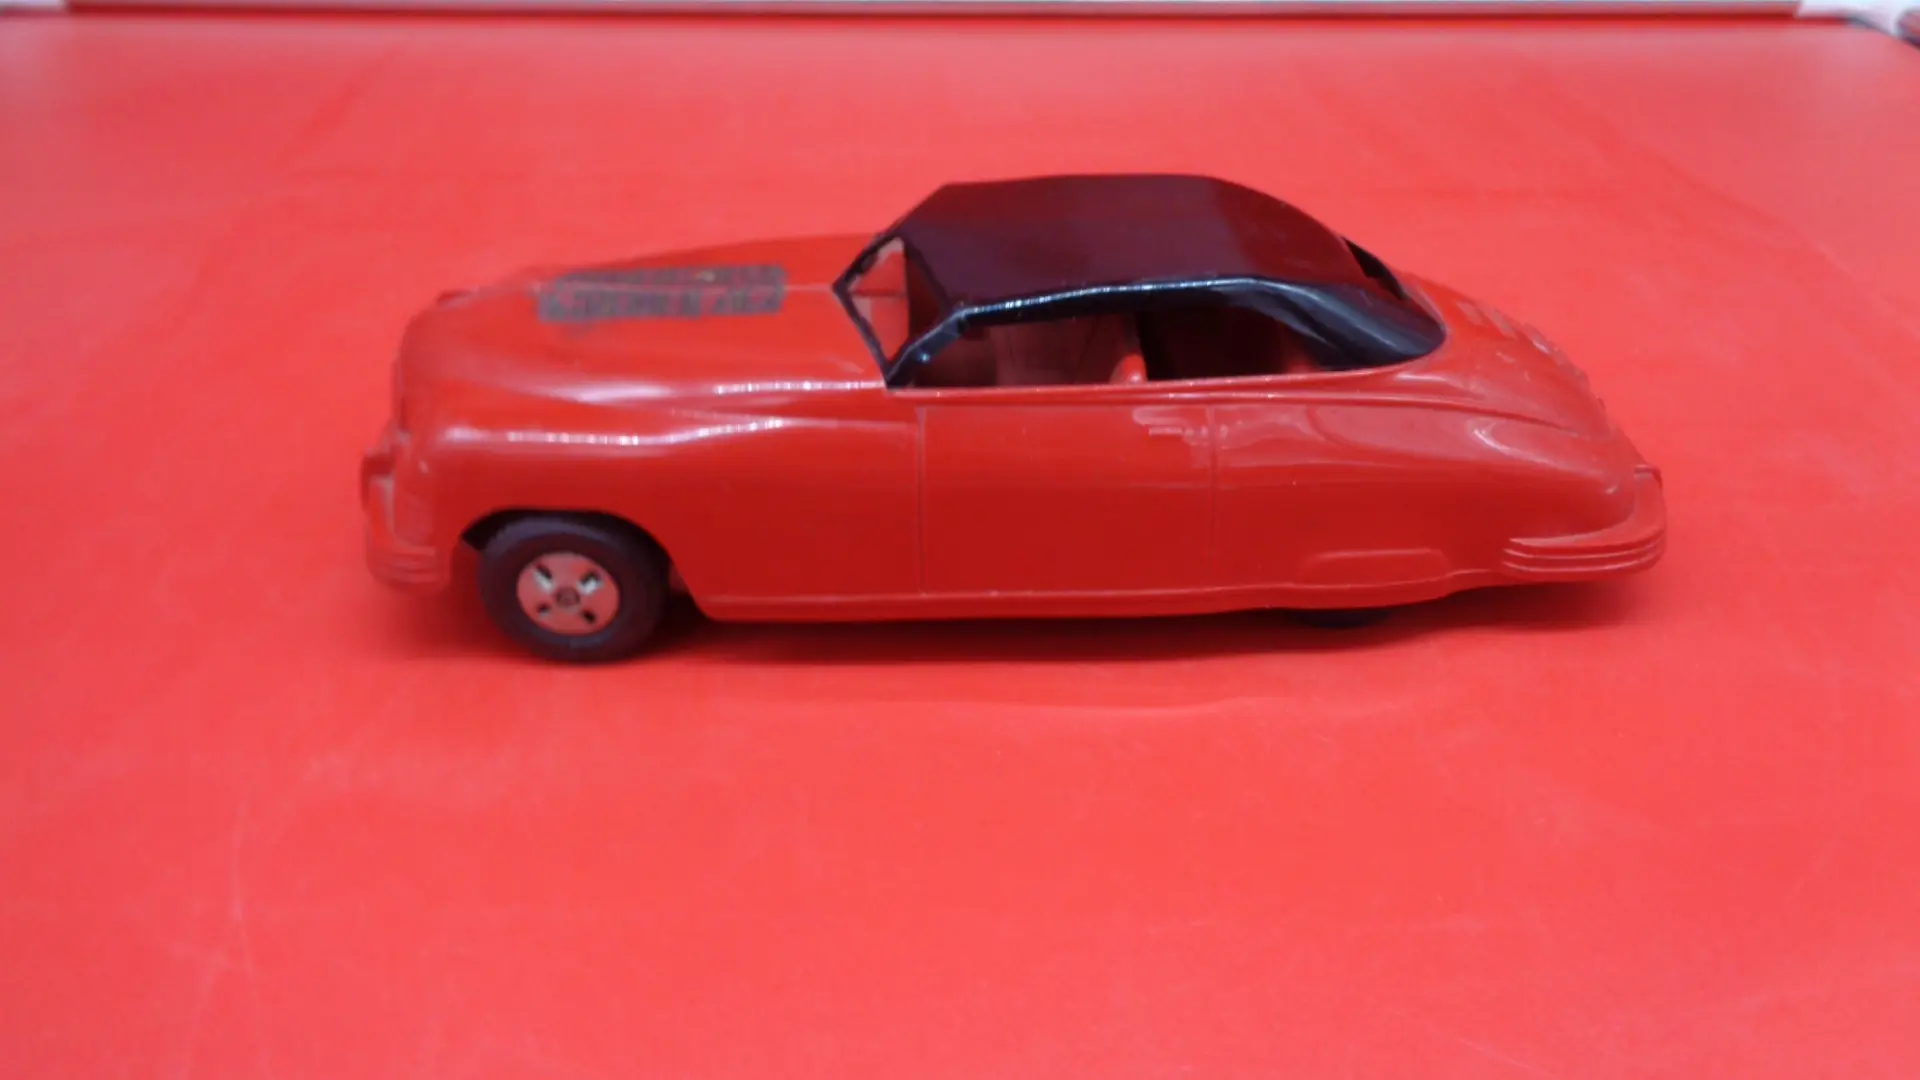 Vintage red color Fire Chief plastic toy car left side view